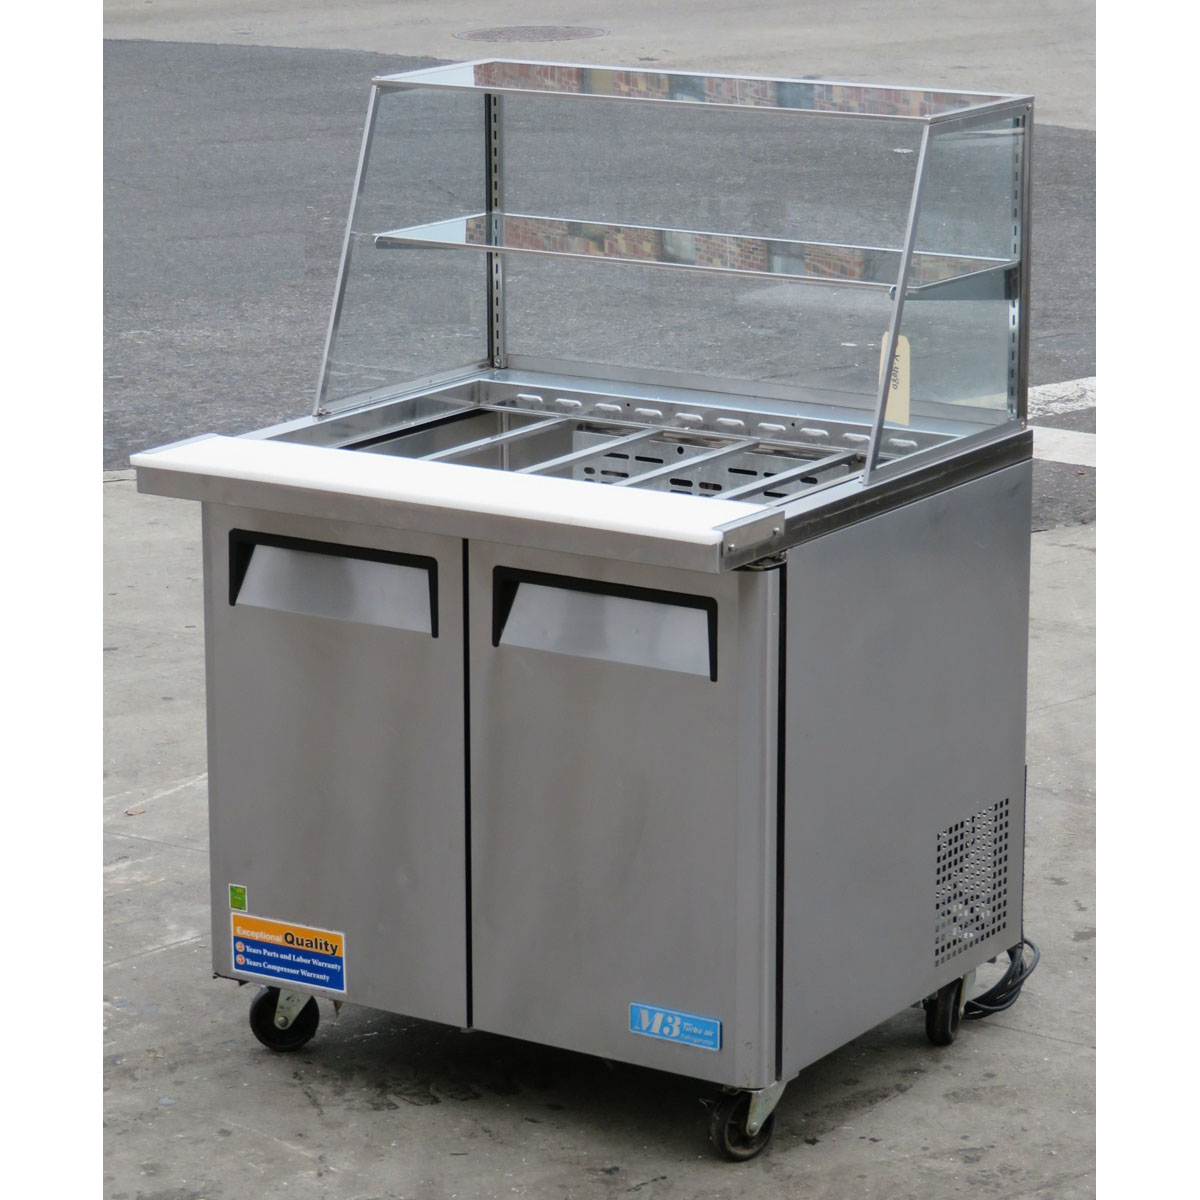 Turbo Air MST-36-15 Refrigerated Sandwich Prep Table 36 Inch, Used Excellent Condition